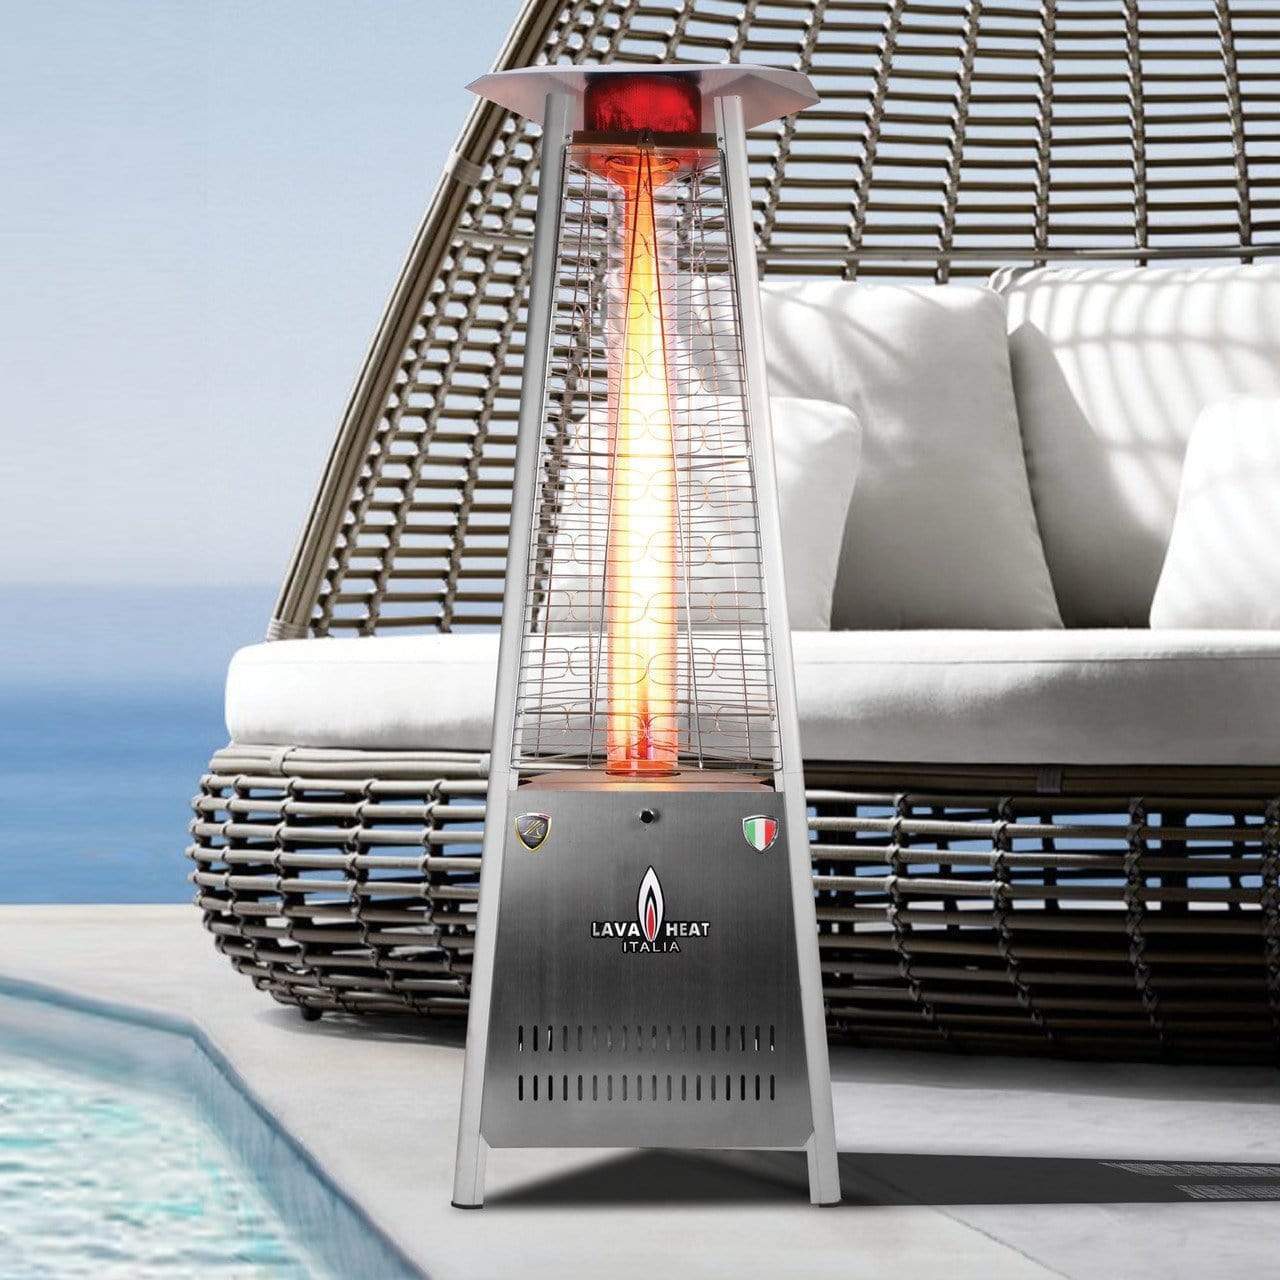 Lava Heat Italia Tower Patio Heater Propane / Stainless Steel The Capri KD Triangle Flame Tower Heater,  72.5", 42,000 BTU, Electronic Ignition, Liquid Propane or Natural Gas - KNOCK DOWN